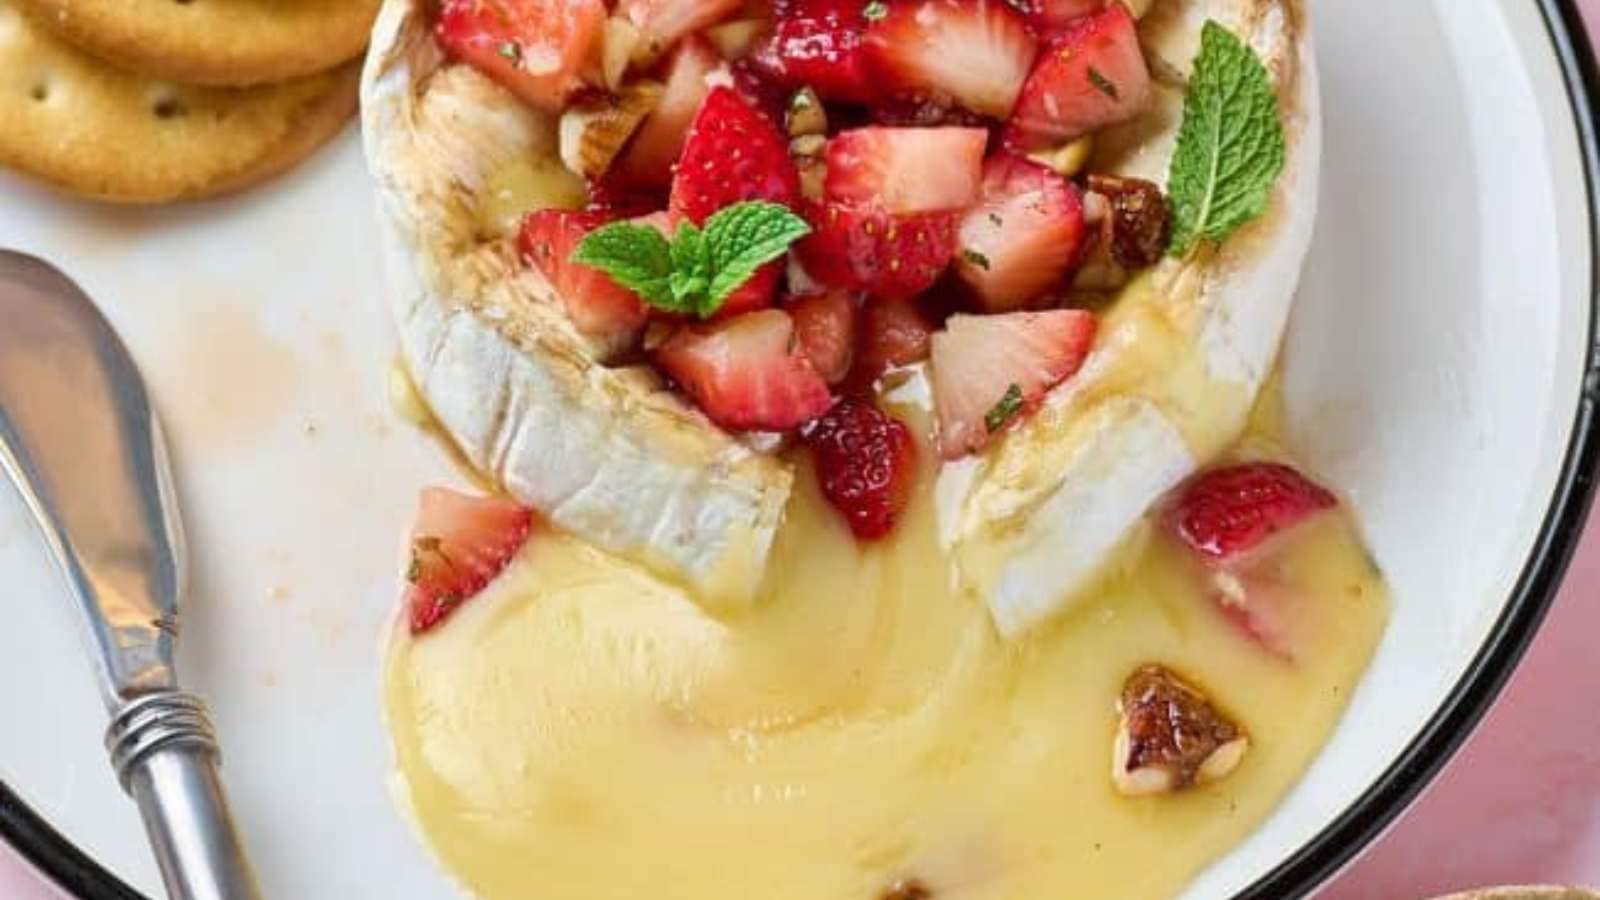 Strawberry Baked Brie recipe by Lemon Blossoms.